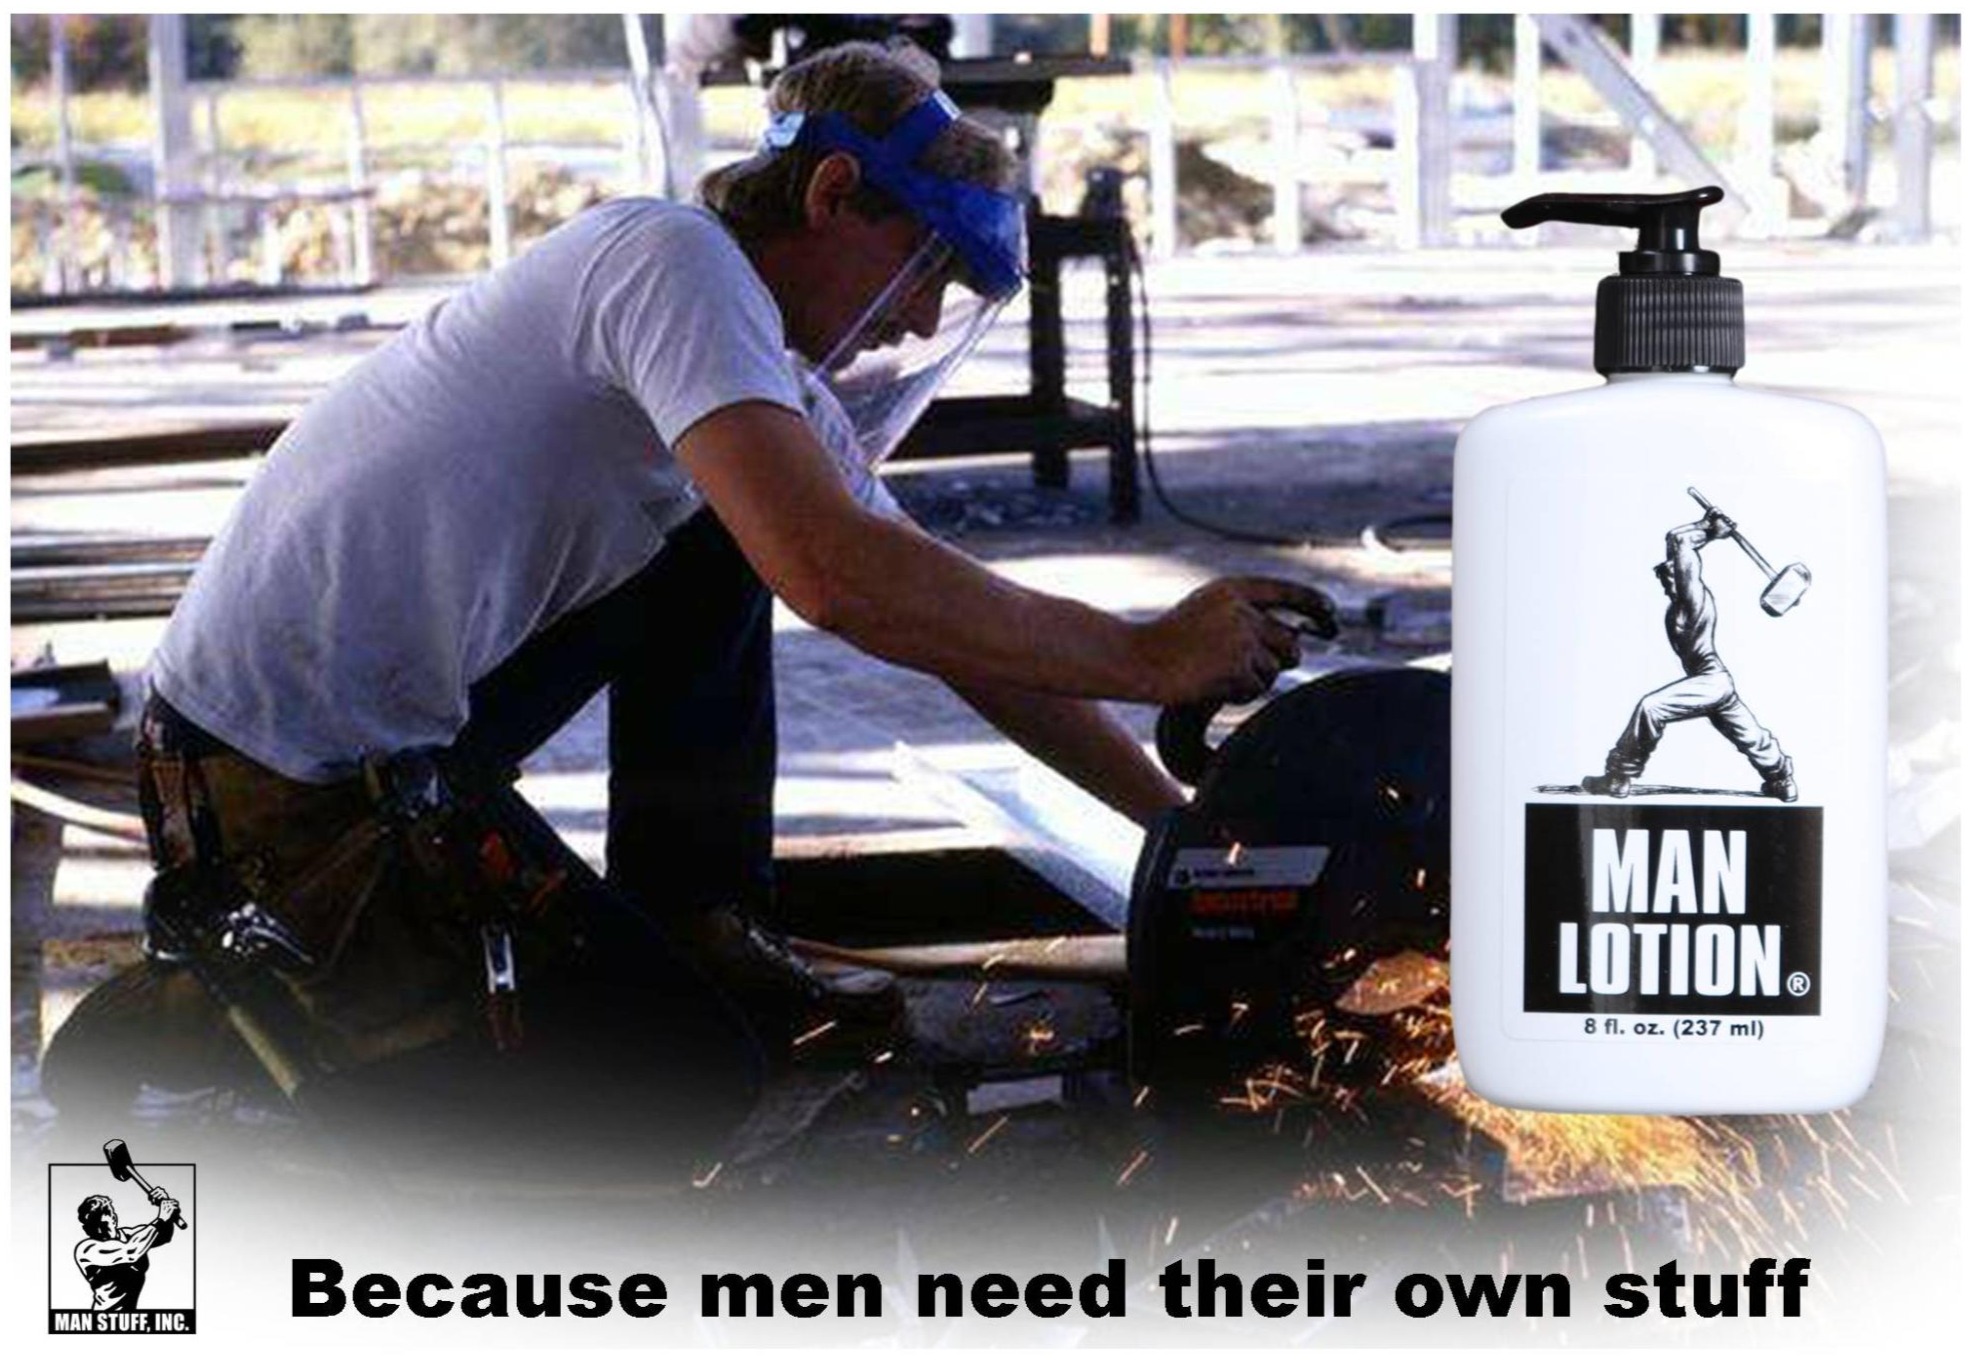 Man Cutting steel with Man Lotion Bottle in foreground. Tag line - Because men need their own stuff